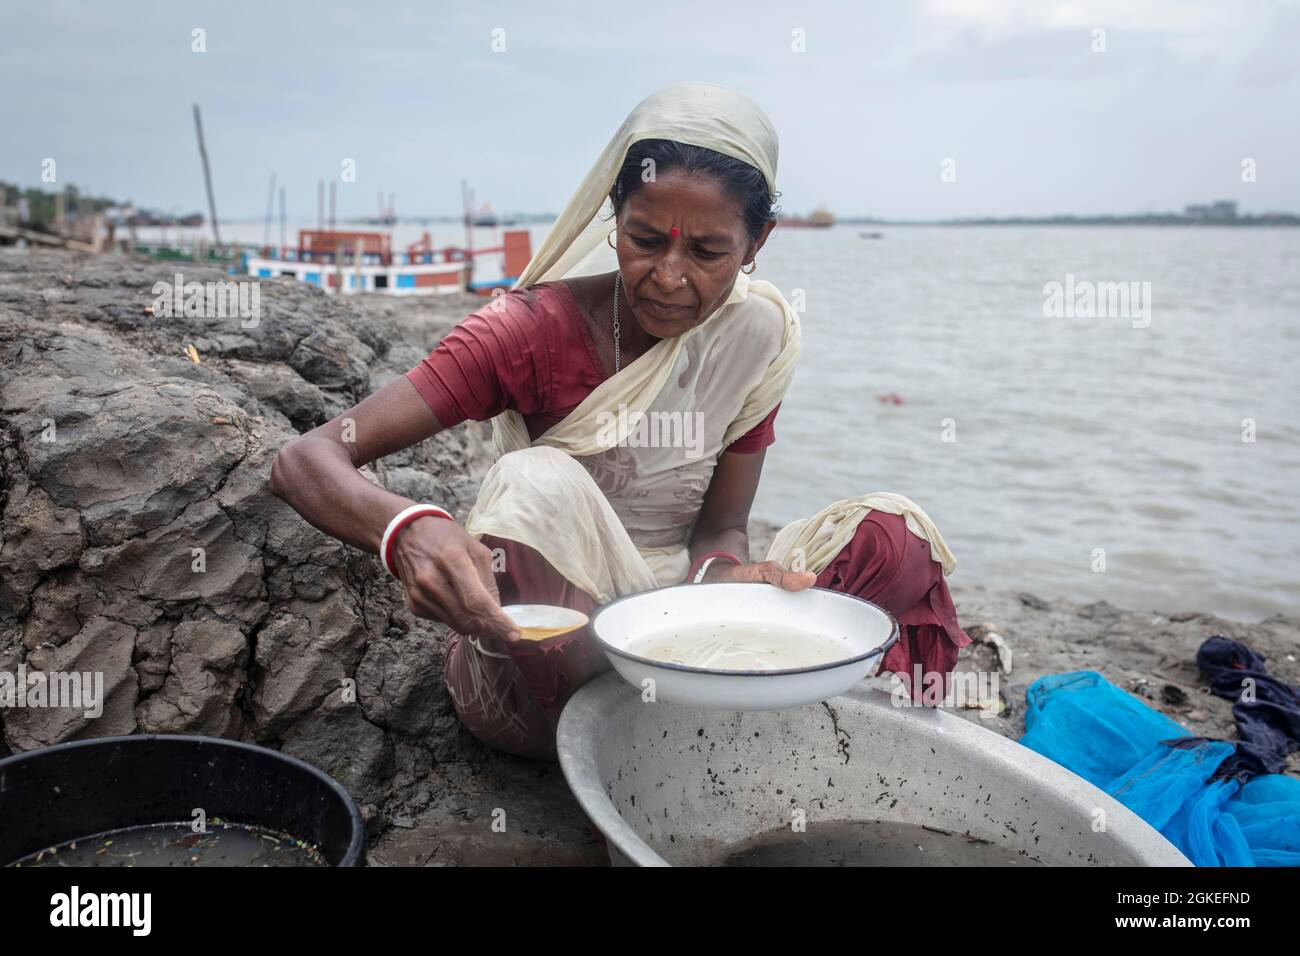 A woman sieves river water from wash bowls on a muddy embankment, shrimp larvae remain in the sieve to be sold to a shrimp farm, Mongla, Sundarbans Stock Photo